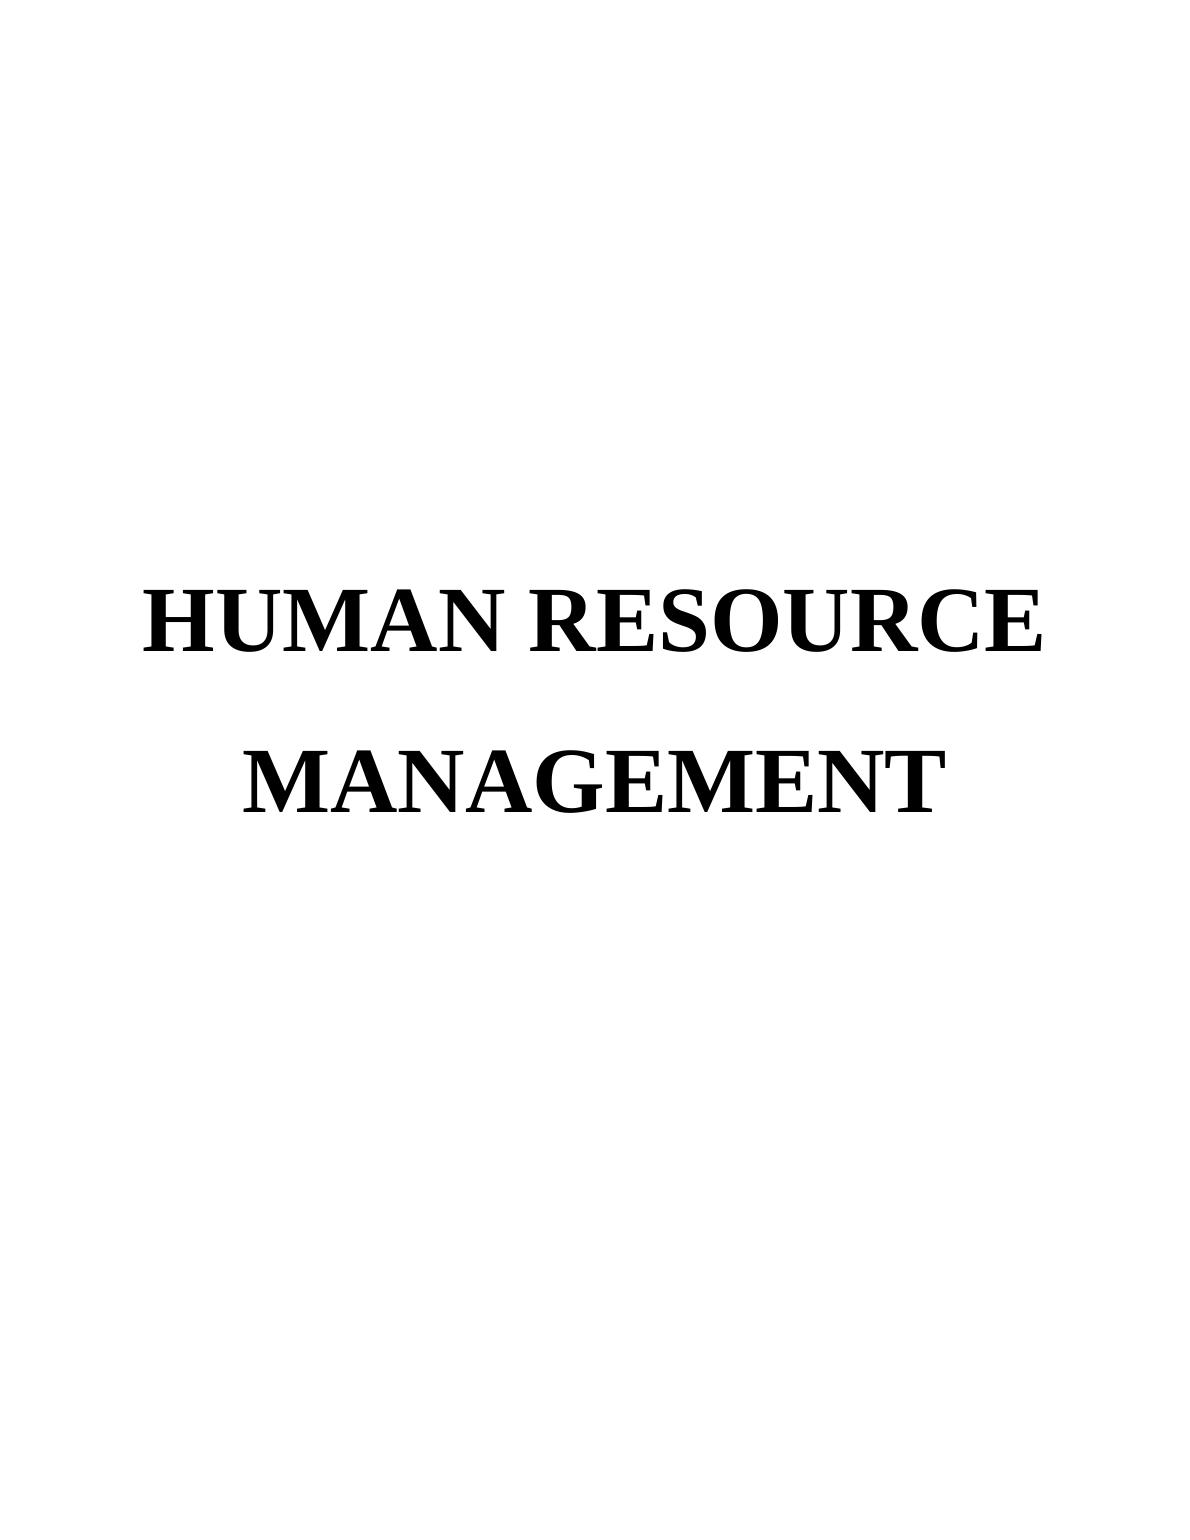 HUMAN RESOURCE MANAGEMENT TABLE OF CONTENTS_1